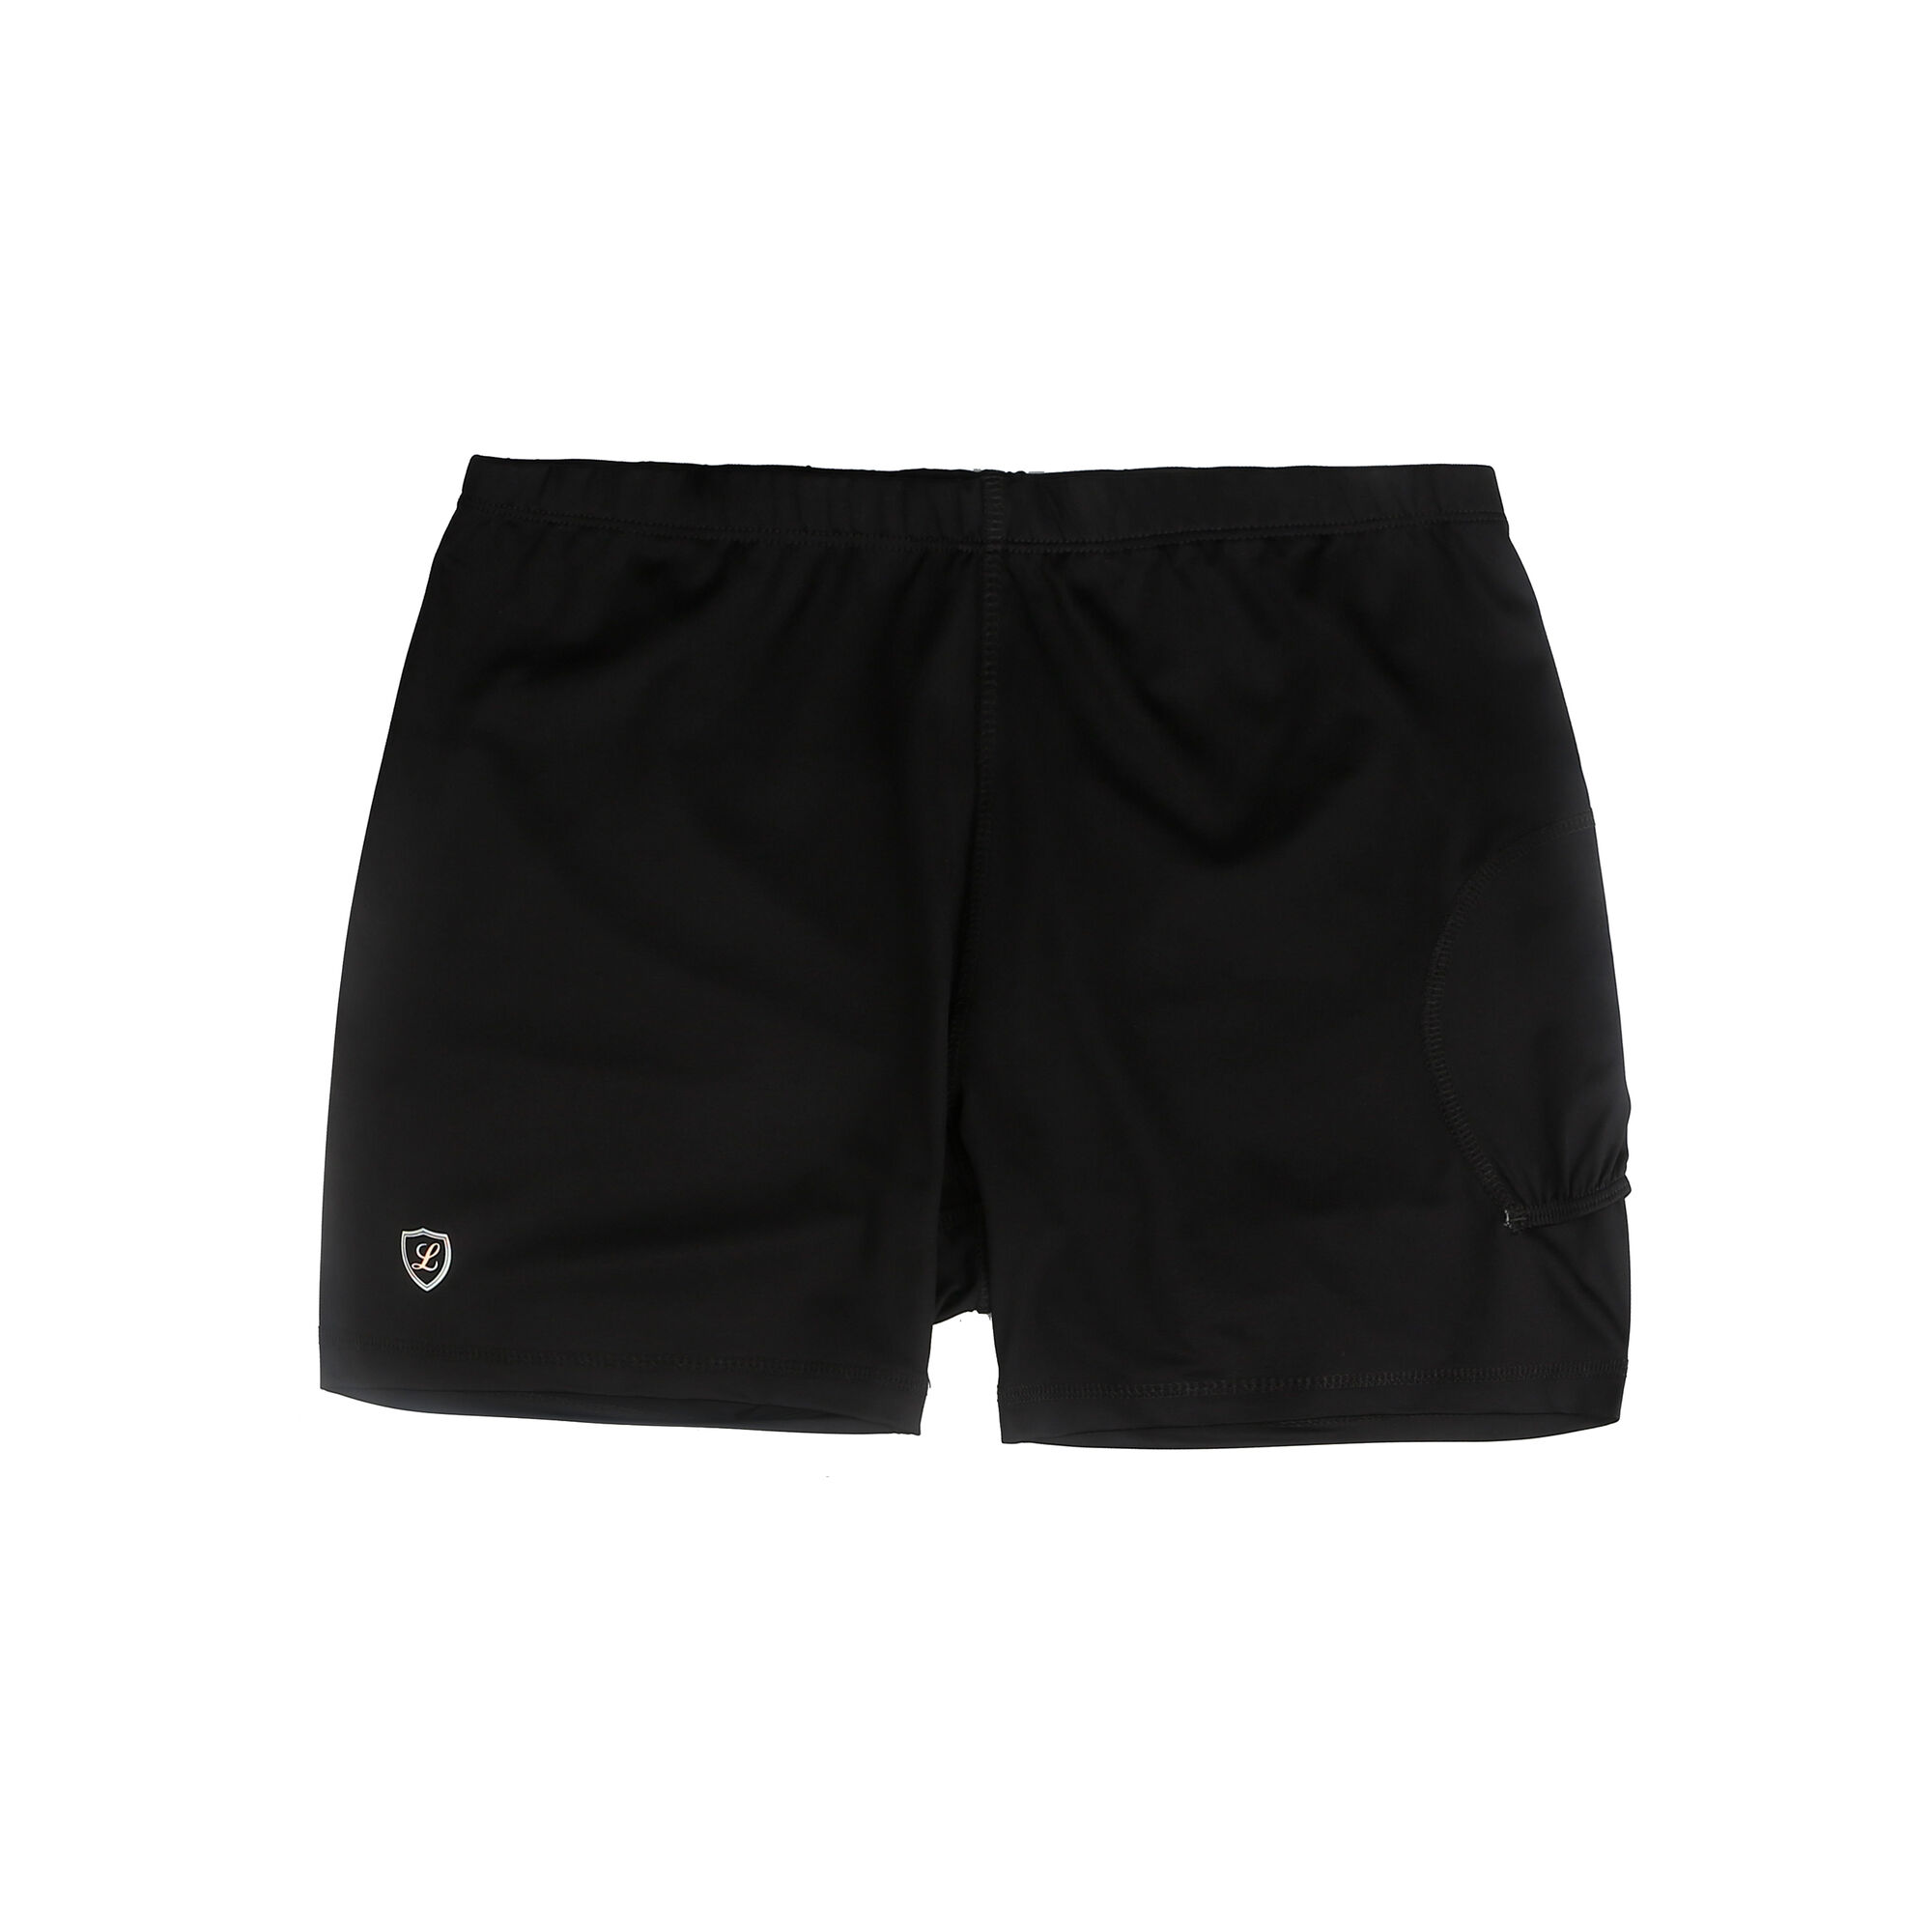 Buy Limited Sports Tight Ball Shorts Women Black online | Tennis Point UK